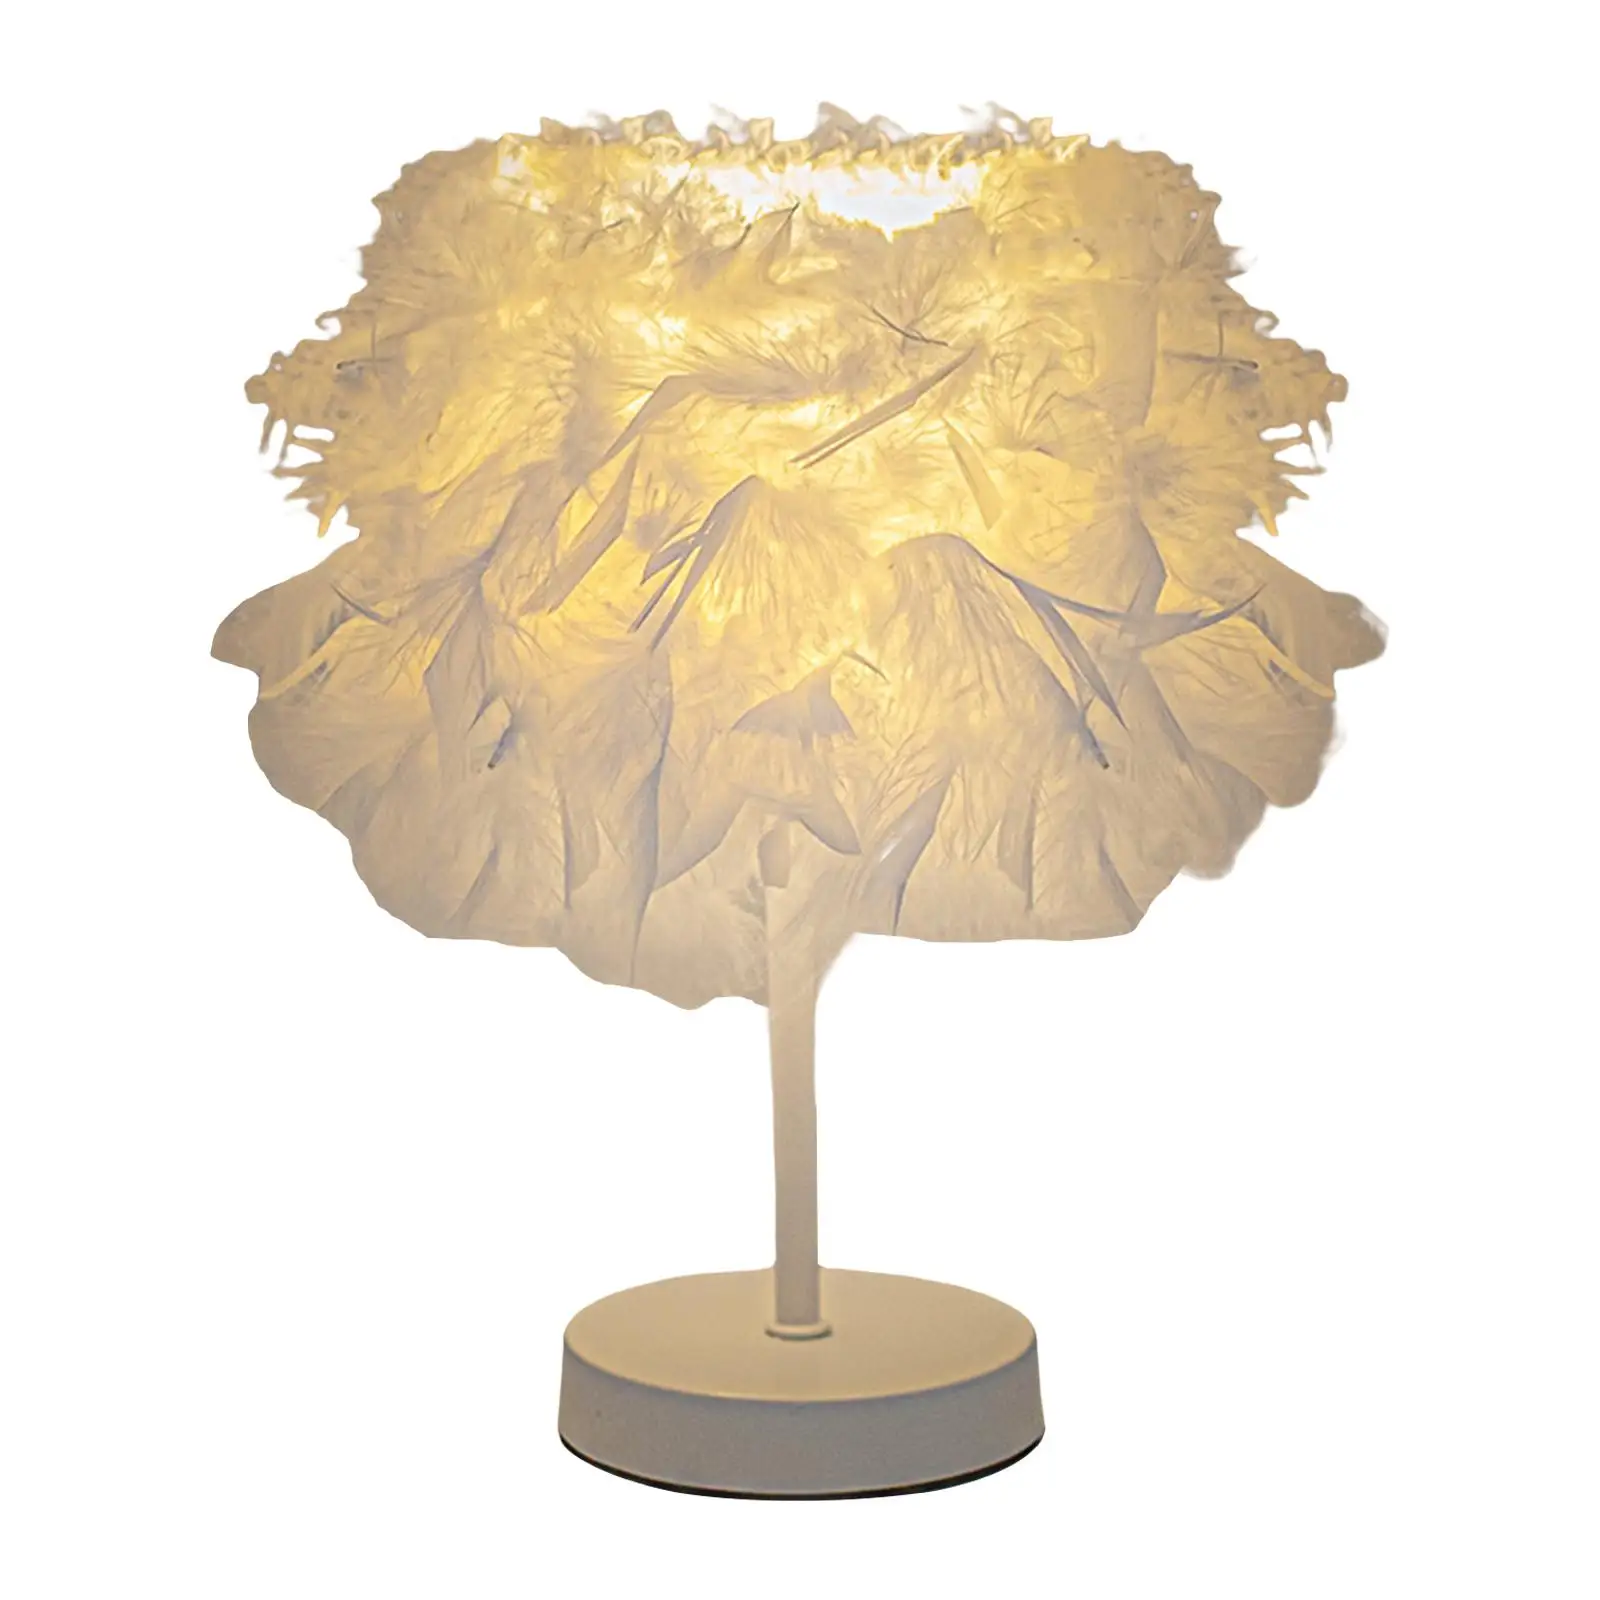 Desk Light Lighting Fixture Decorative Feathers Shade Table Lamp for Party